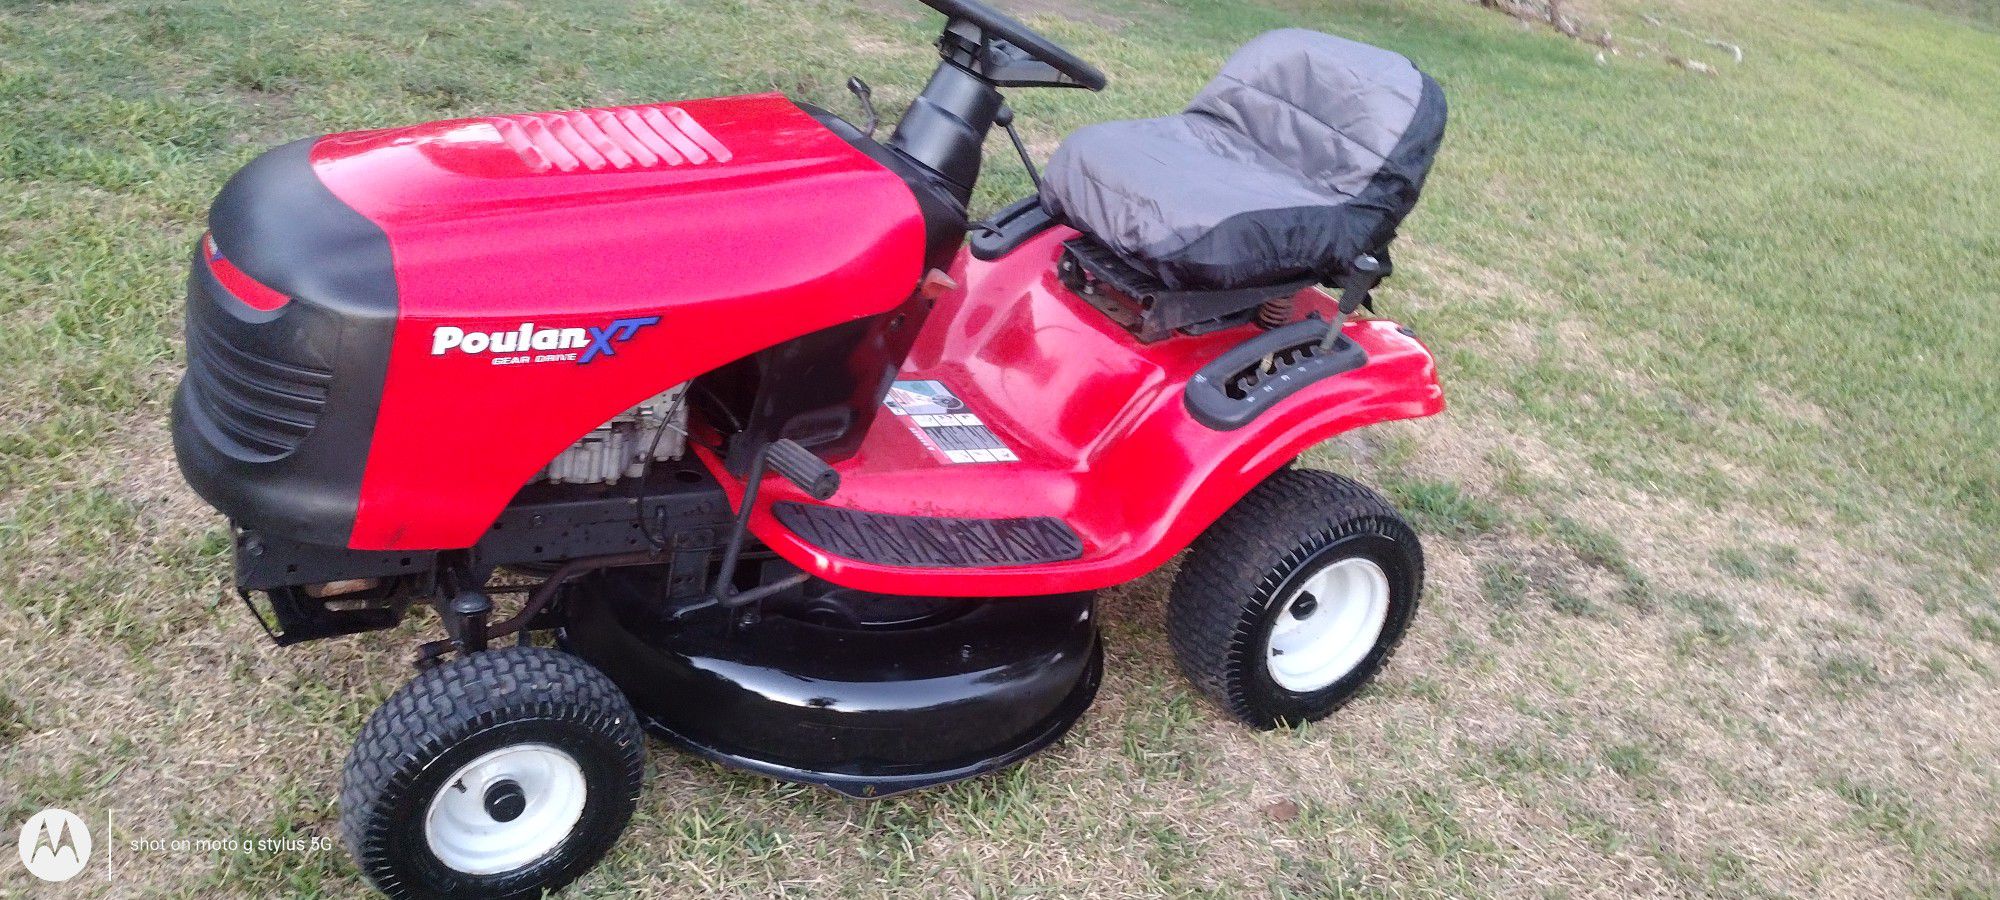 30"Cut riding lawn mower runs cuts great no issues 600 cash firm read full post before asking?